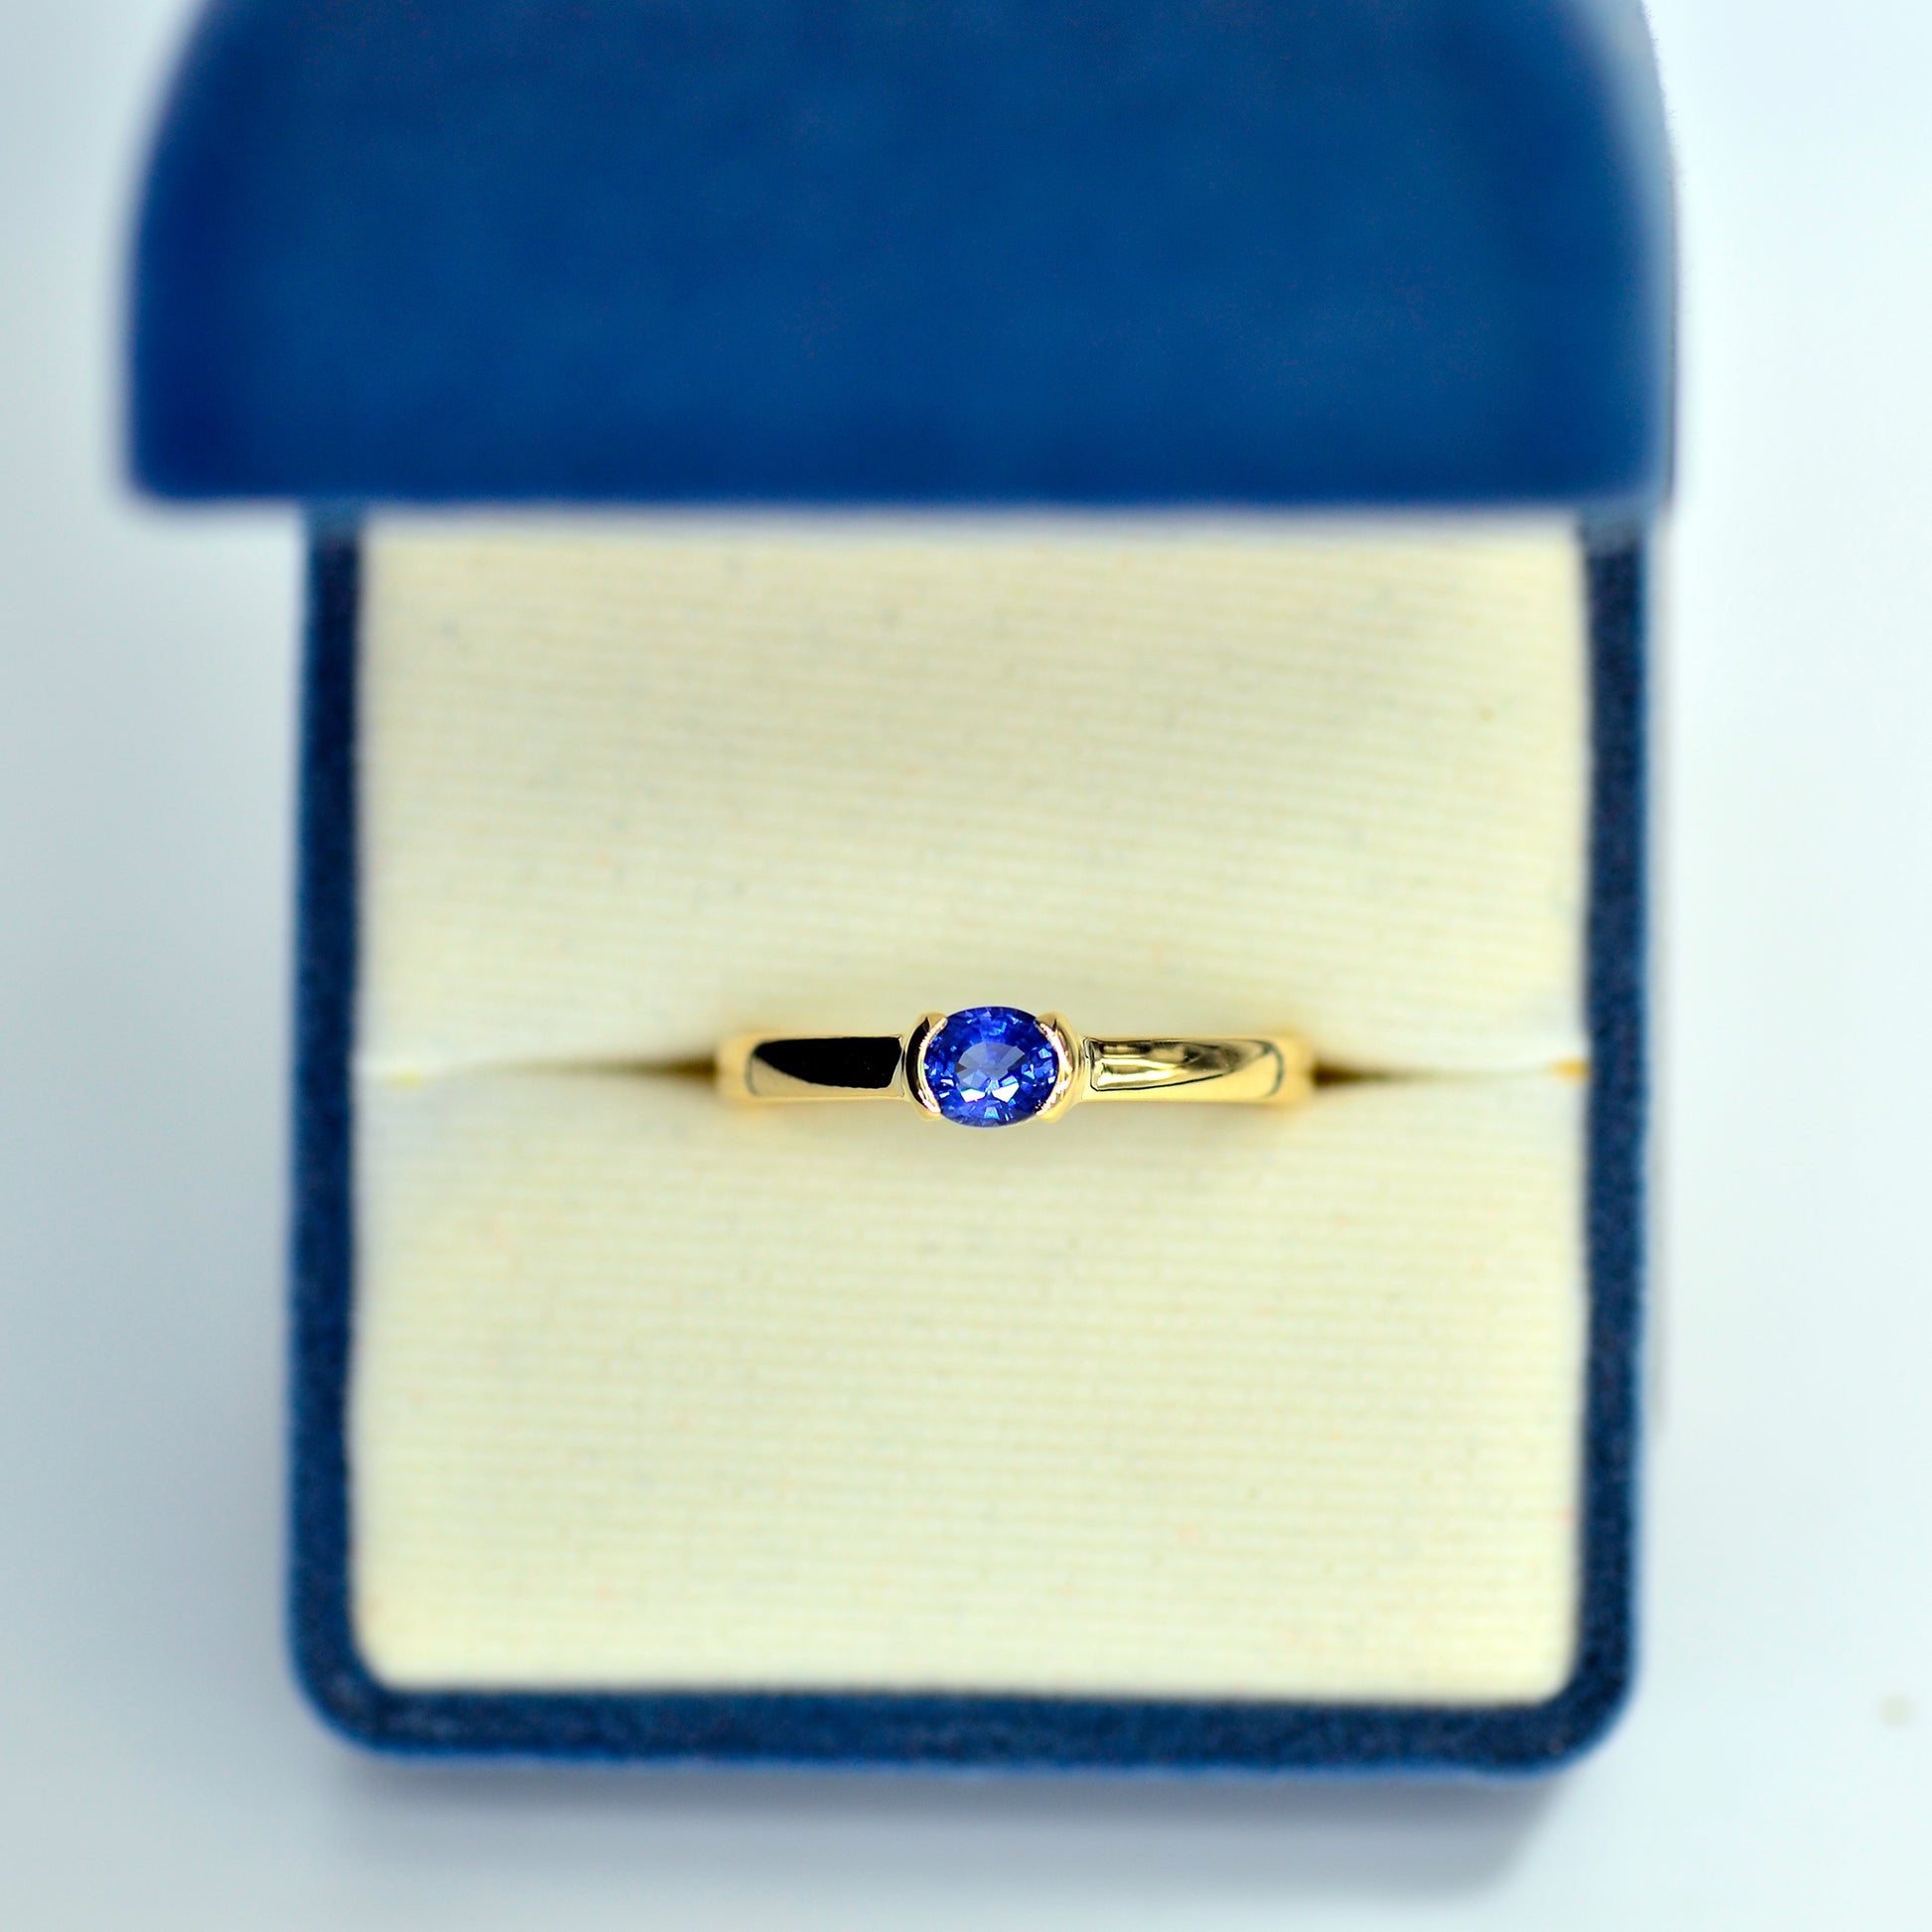 Perfect gift for anniversary and engagement ring. This blue sapphire stack ring is a handmade ring with 18K yellow gold